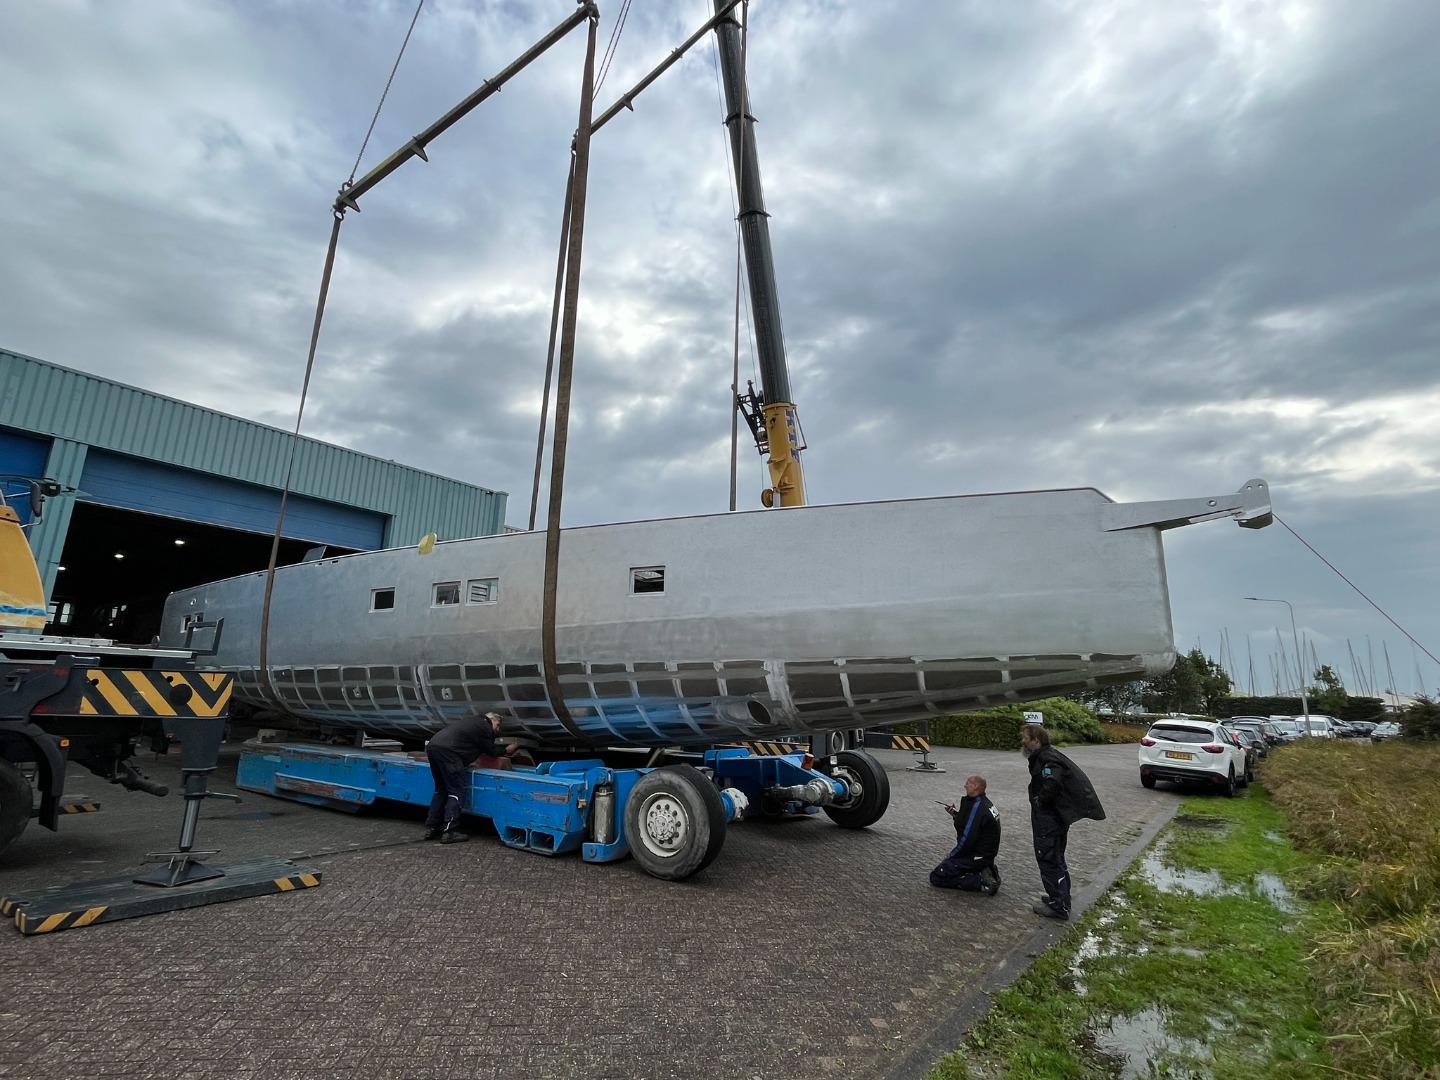 This is an Owen Clarke Design designed aluminium blue water centreboard explorer / expedition cruising yacht being turned over at KM Yachts in 2023.